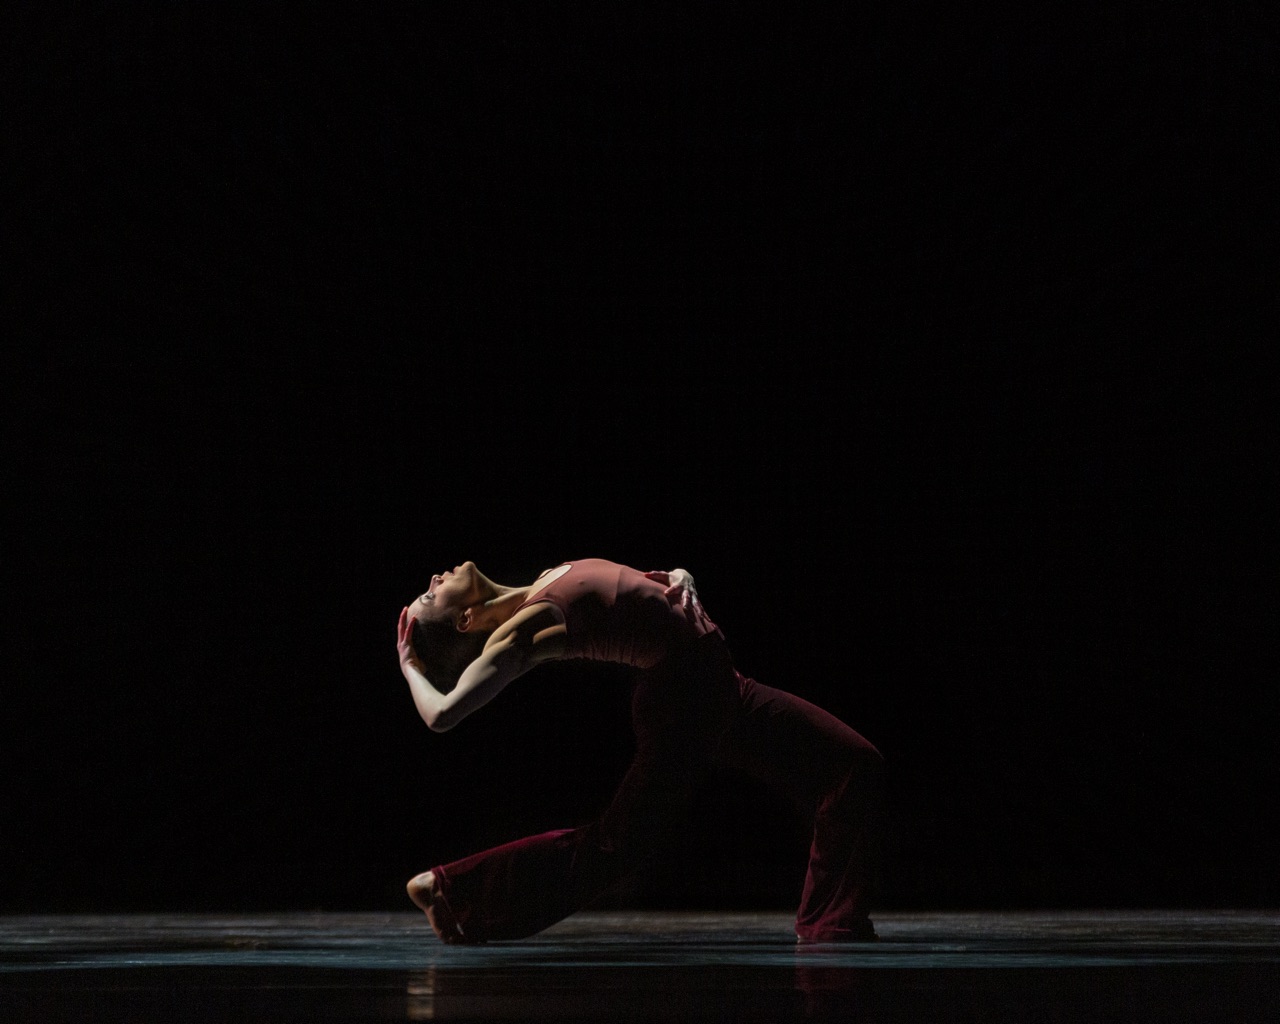 very dimly lit dancer doing a deep back bend with her hand above her head